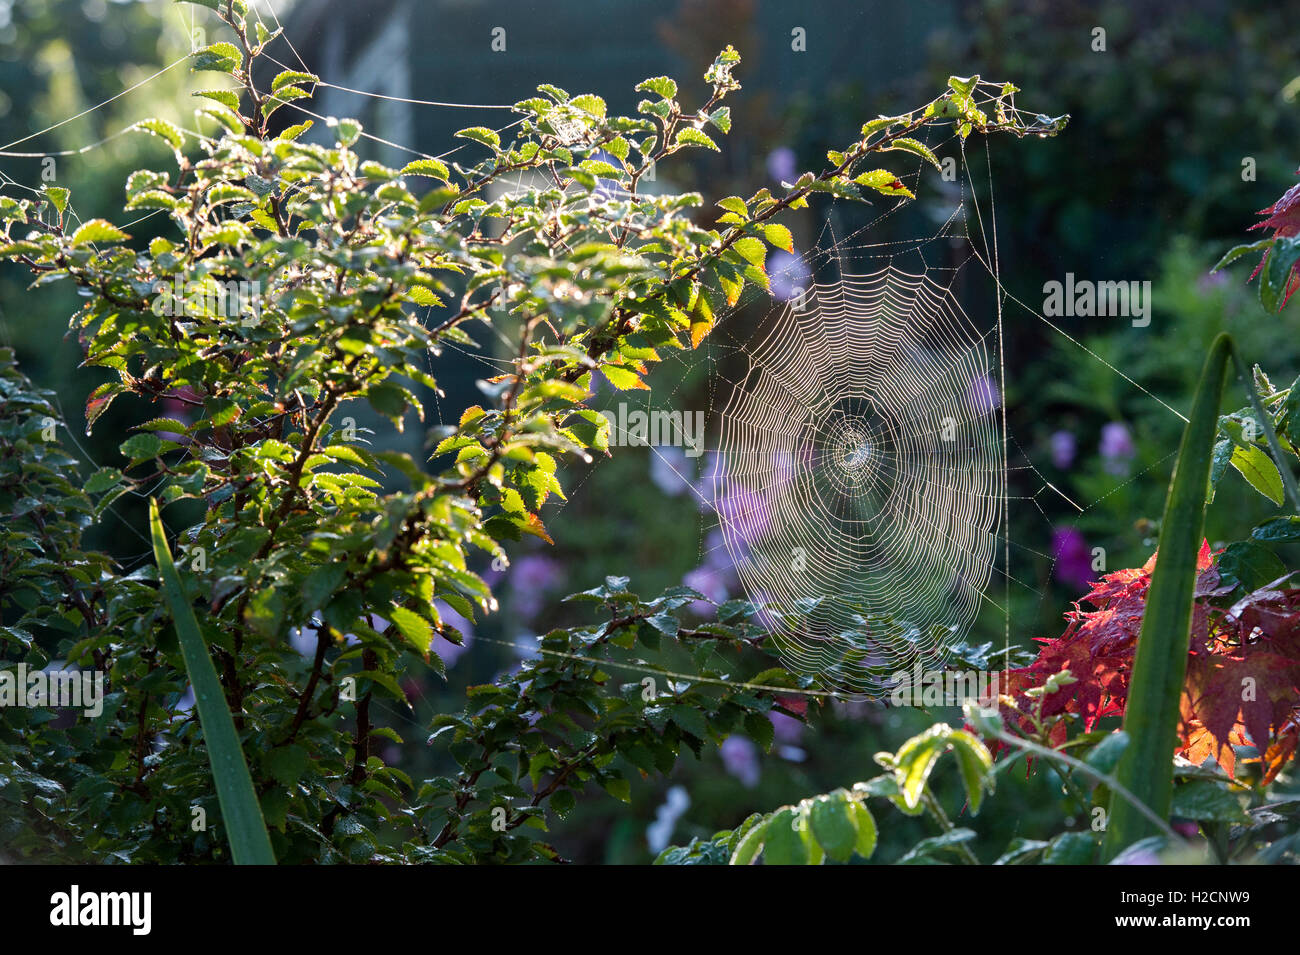 Morning sunlight lighting up a spiders web in an english garden in autumn Stock Photo